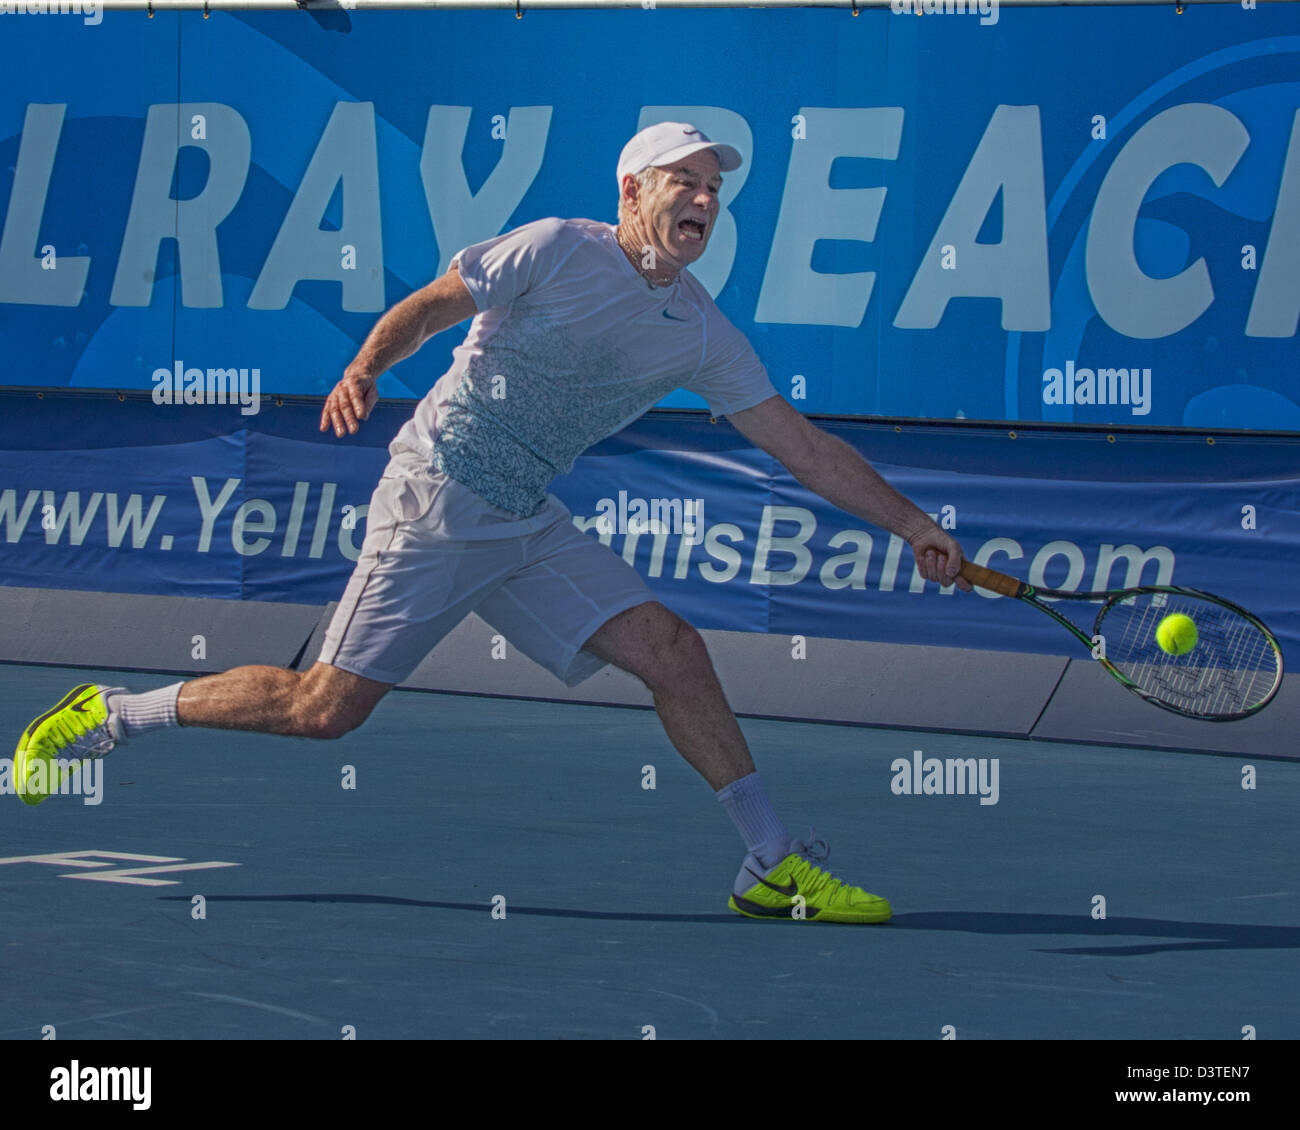 Delray Beach, Florida, USA. 24th Feb, 2013.  Tennis legend and Hall of Famer John McEnroe was defeated in the ATP Champions Tour final 6-4, 6-2 by Carlos Moya who became the first two-time ATP Champions Tour winner at the Delray Beach ITC. The International Tennis Championships is an ATP World Tour 250 series men's tennis tournament held every year in Delray Beach, Florida. Nike sponsored athlete John McEnroe. (Credit Image: Credit:  Arnold Drapkin/ZUMAPRESS.com/Alamy Live News/Alamy Live News) Stock Photo